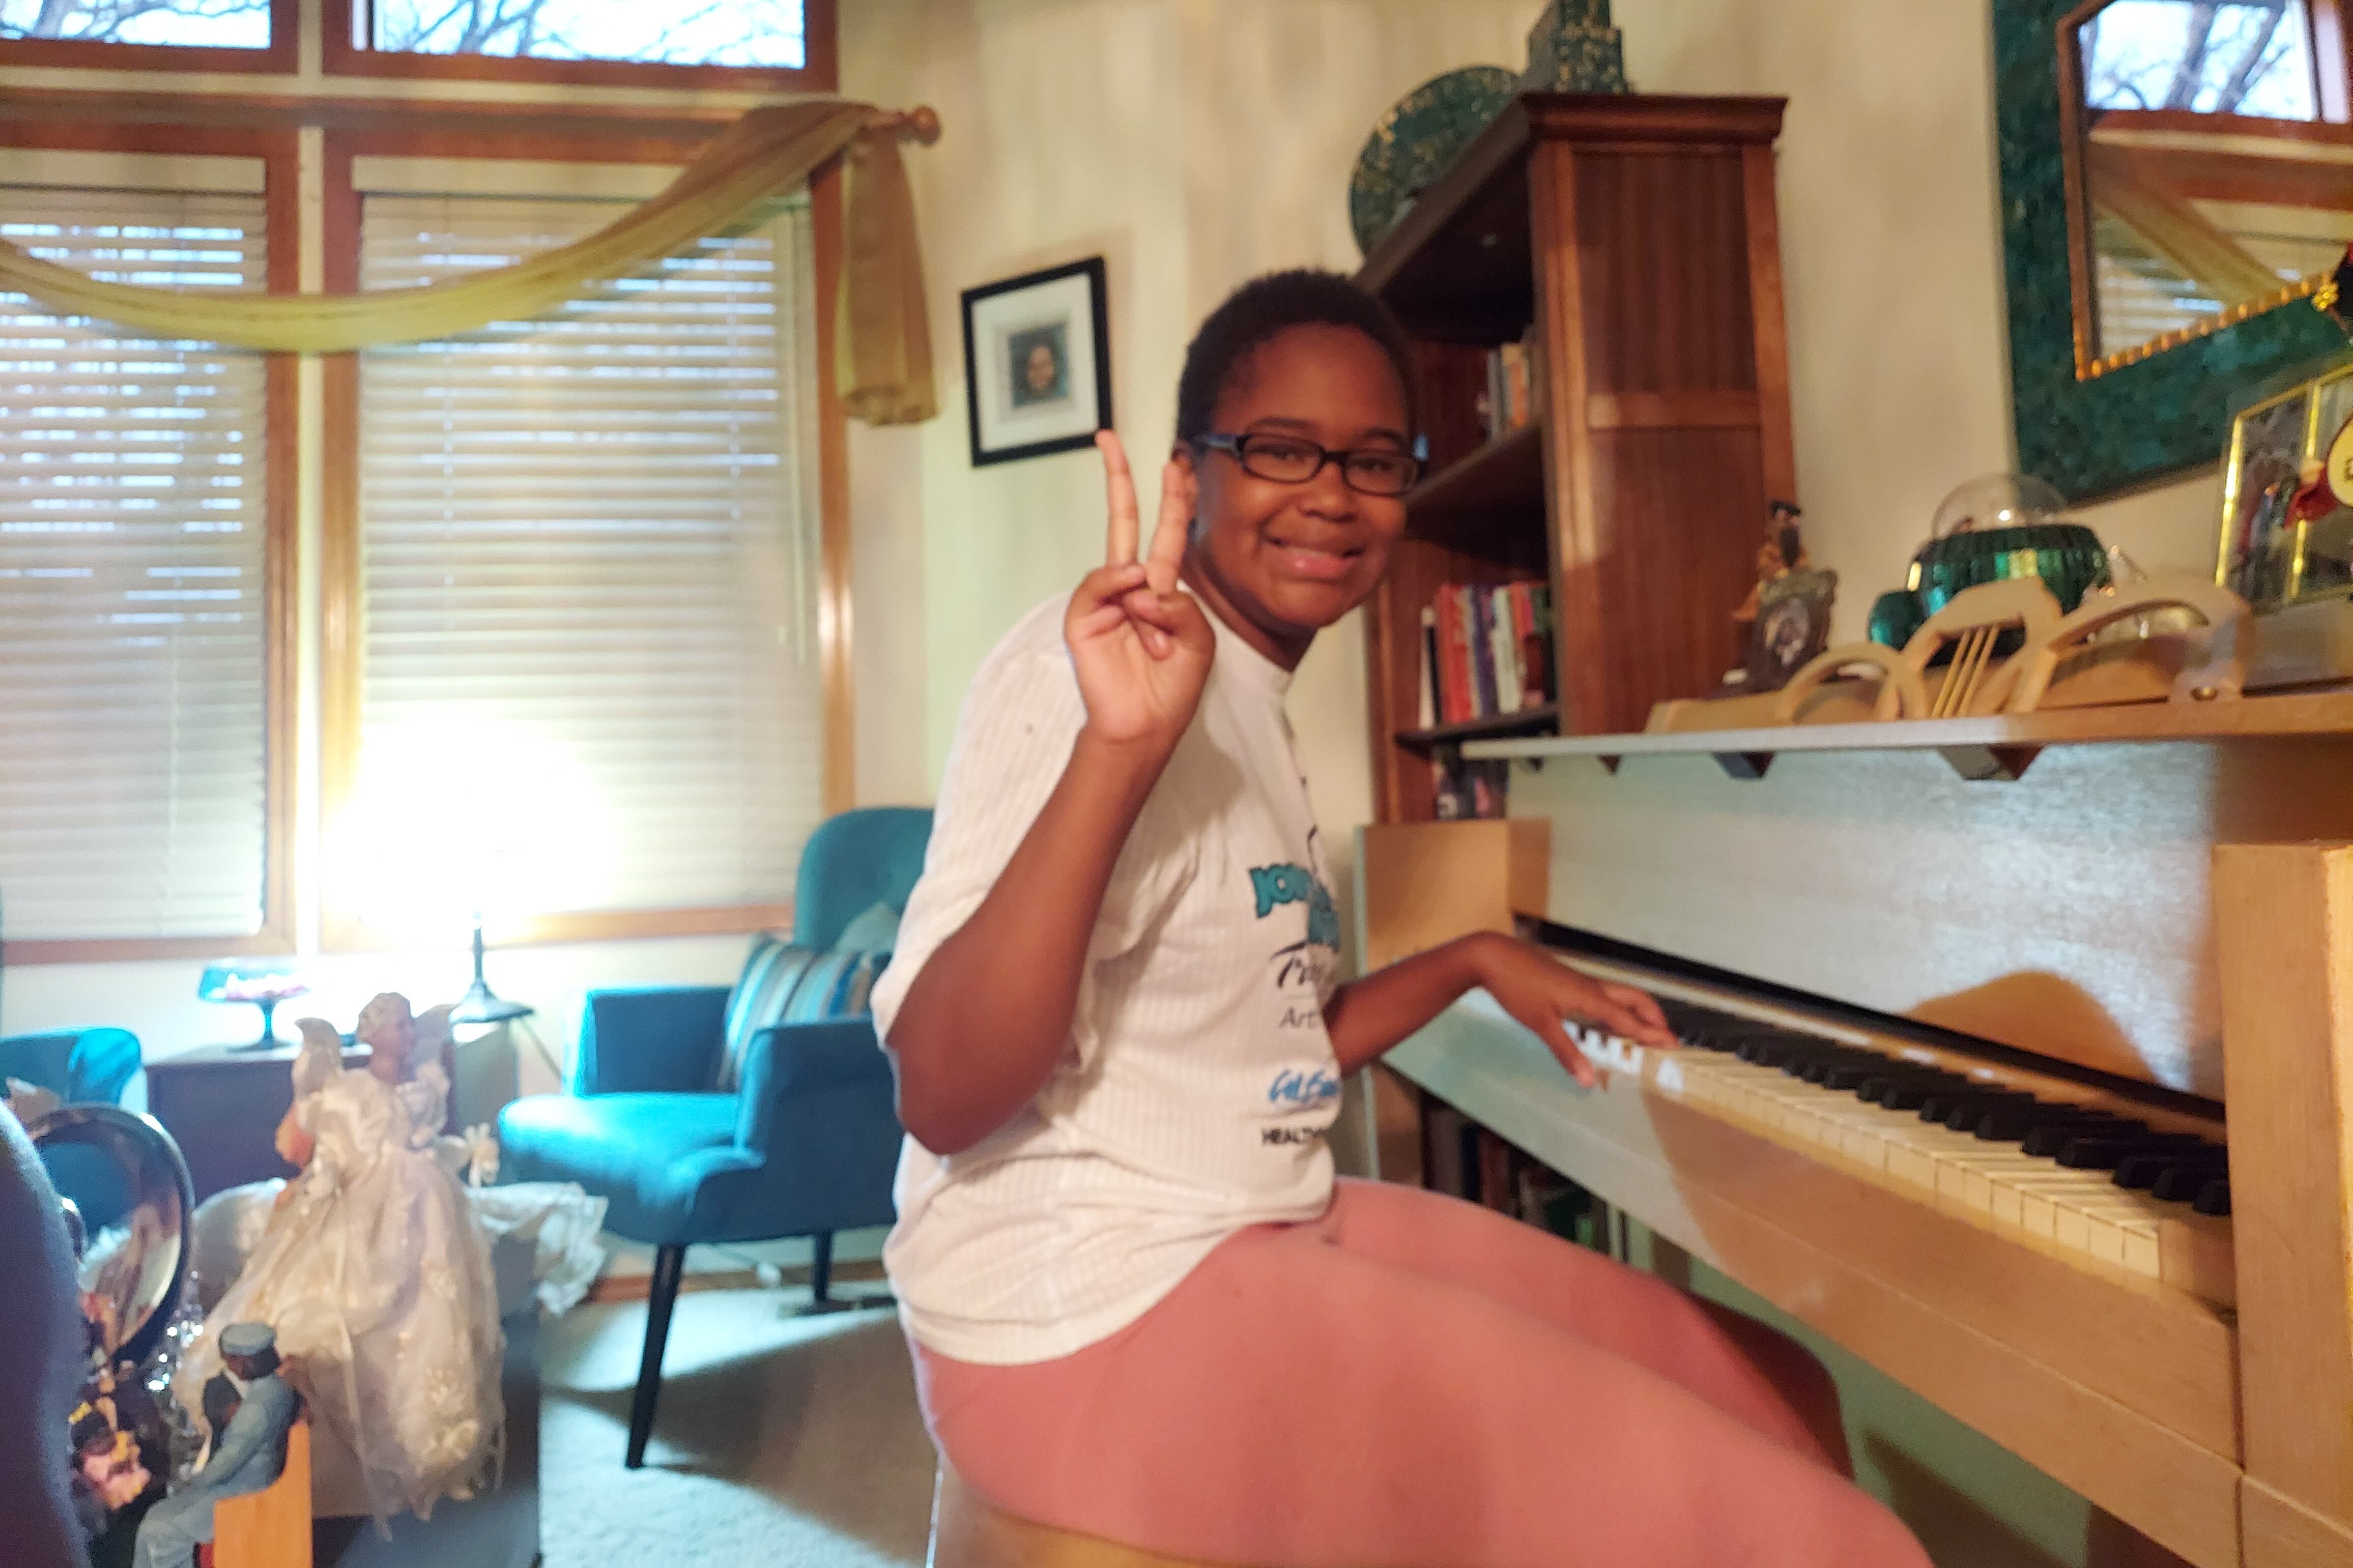 Karinne Jones, 14, sits at a piano and holds up a peace sign at the camera while smiling.